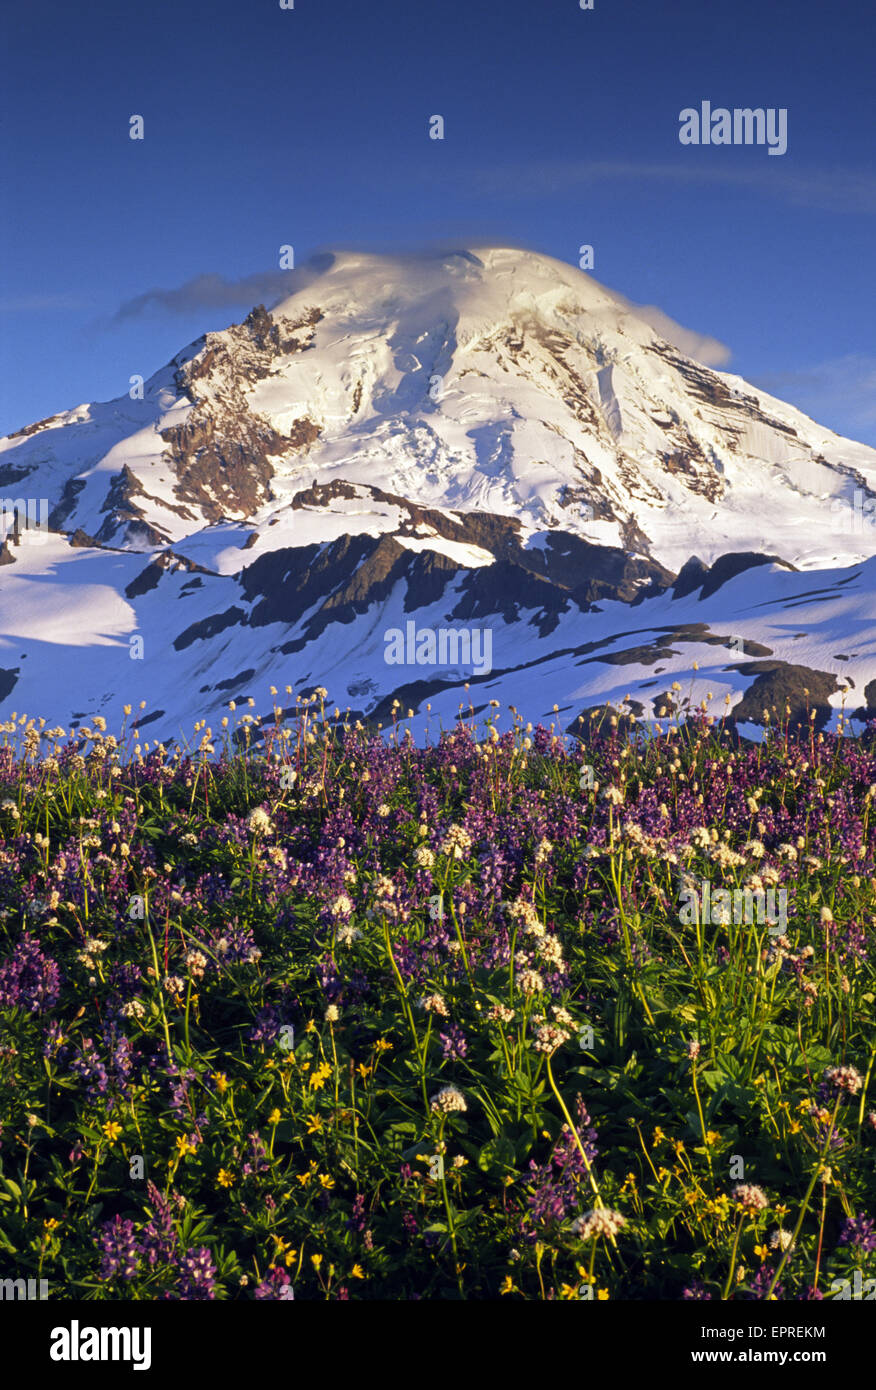 Wildflowers glow in the late evening light in front of the north face of Mt. Baker, in the Mt. Baker Wilderness, Washington. Stock Photo